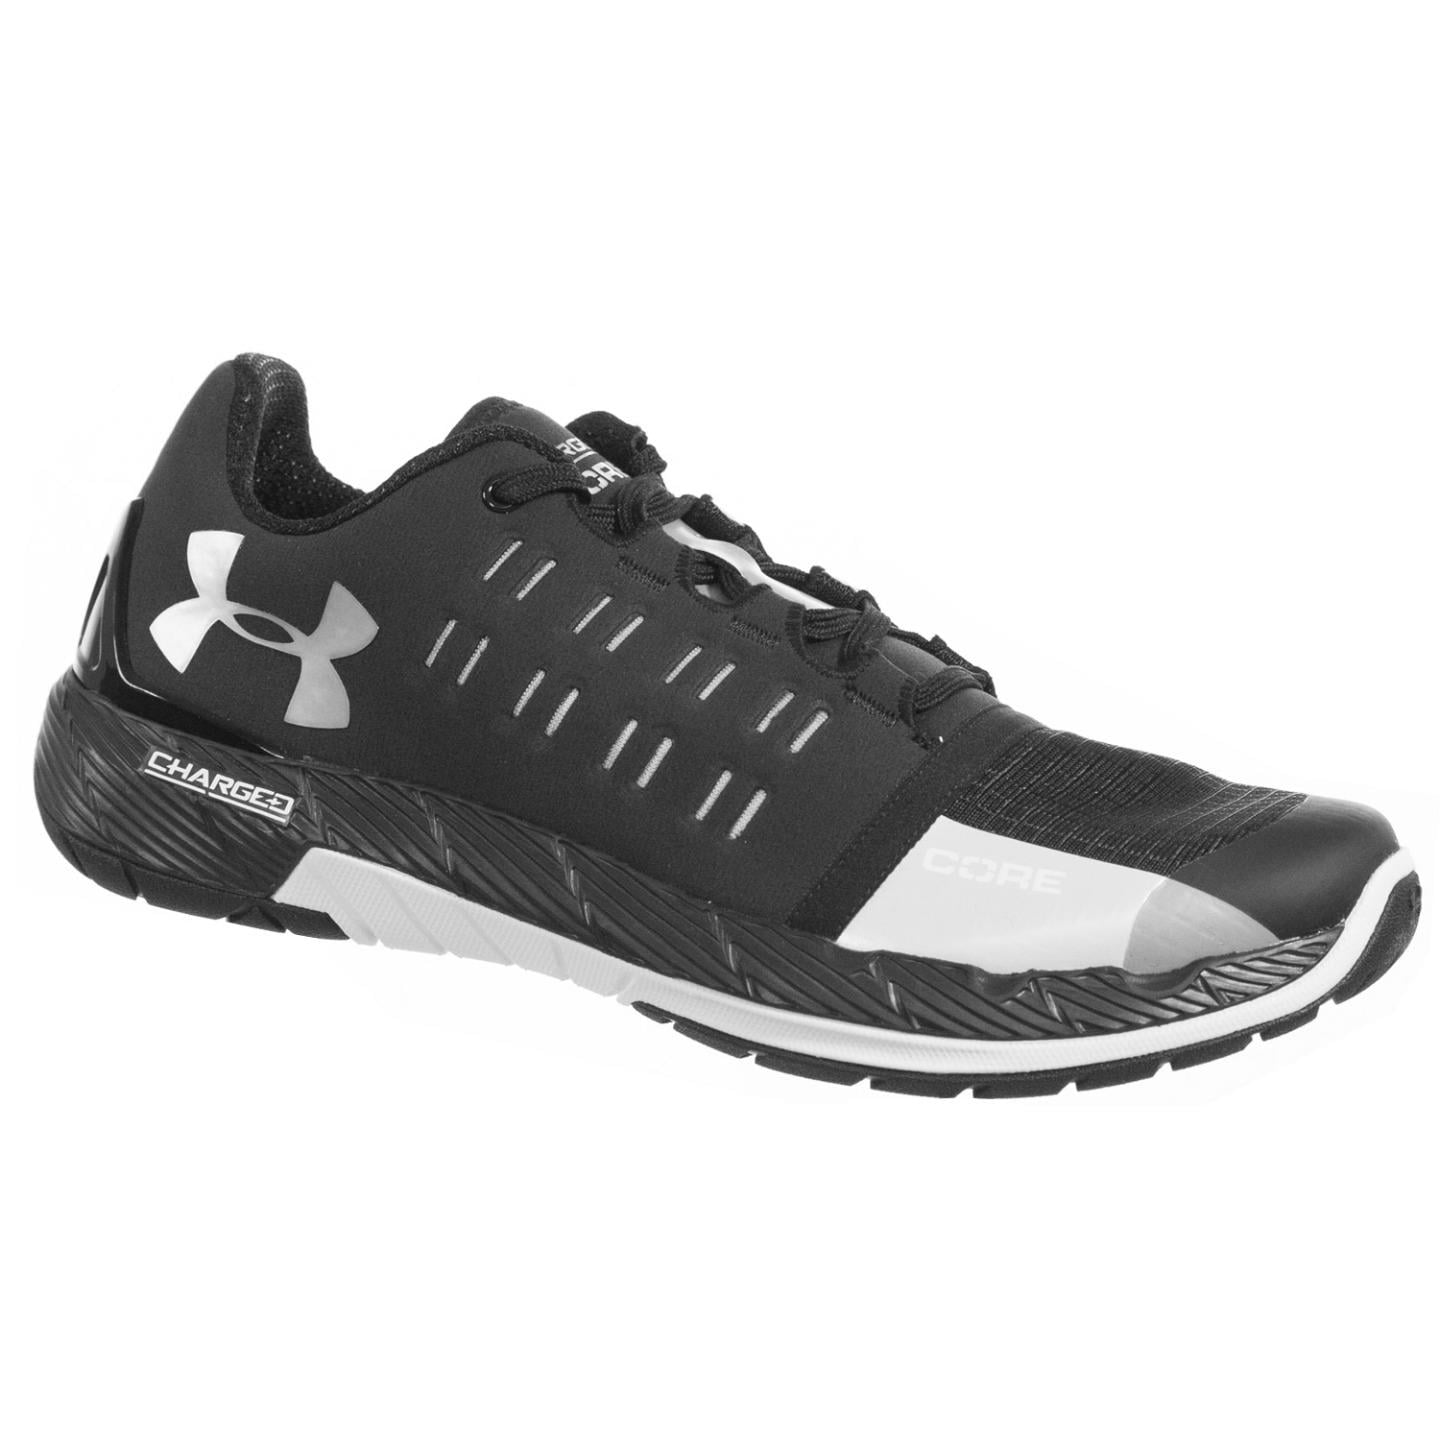 Under Armour - UNDER ARMOUR MEN'S ATHLETIC SHOES CHARGED CORE BLACK ...